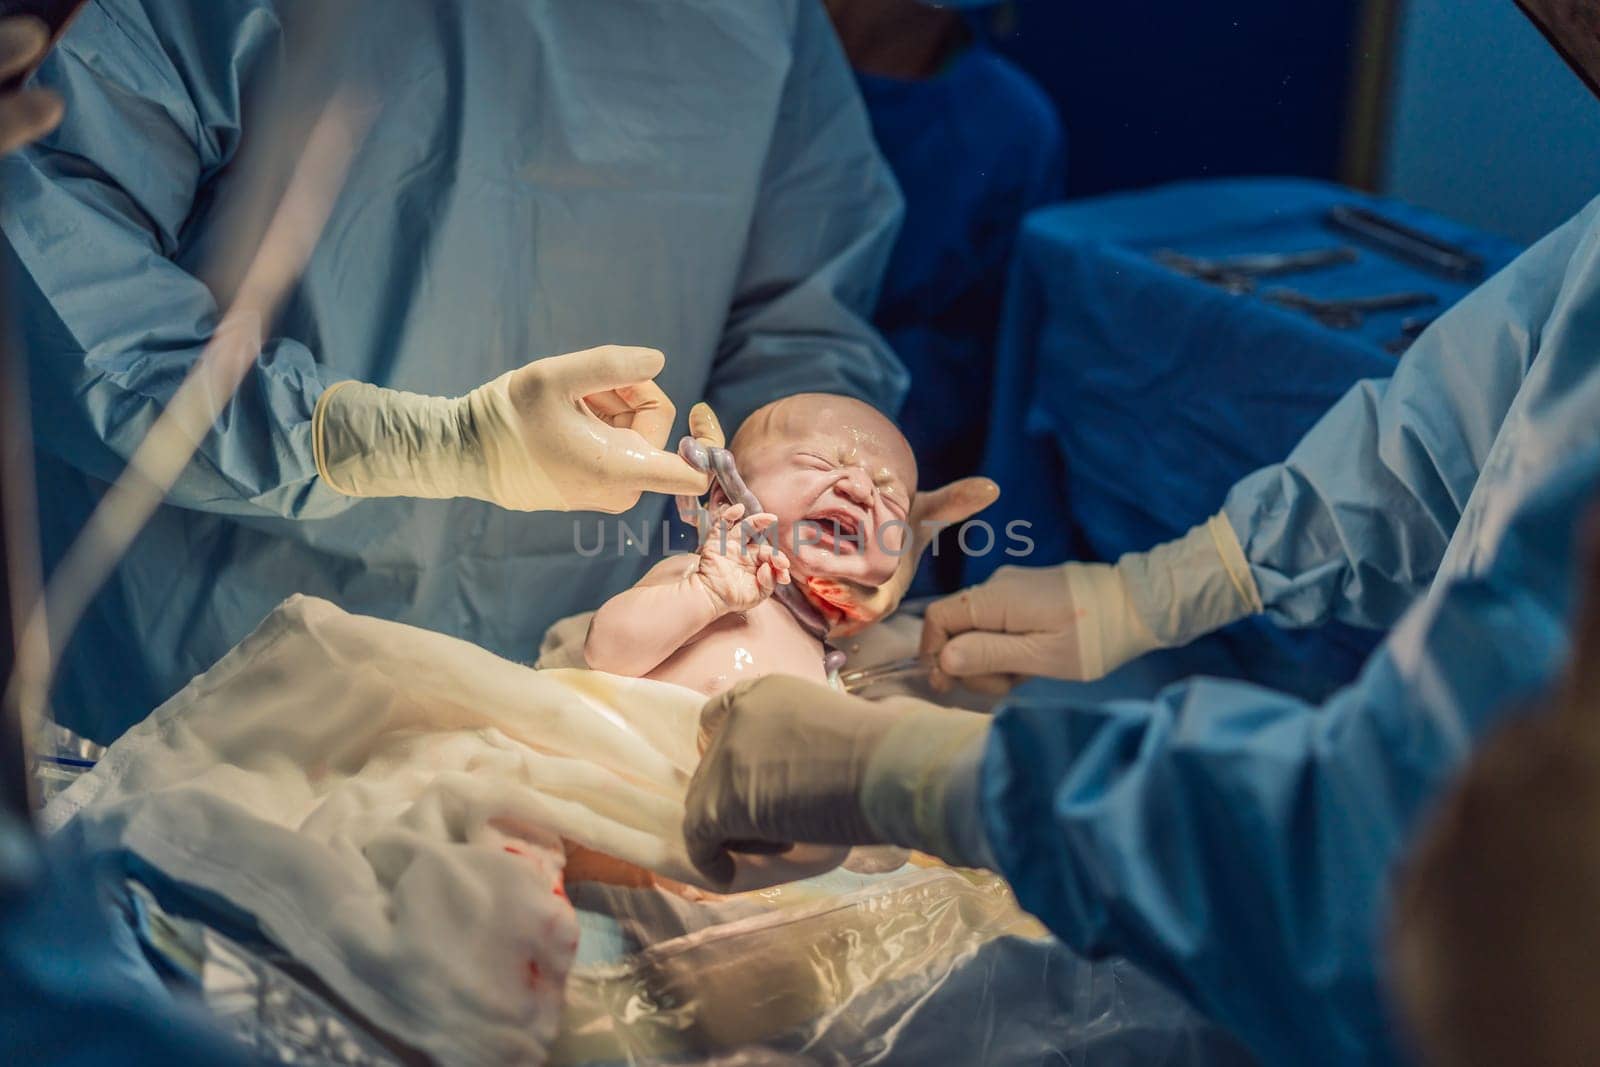 The umbilical cord is visible around the neck of a newborn undergoing cesarean section. This medical moment highlights the intricacies and care involved in childbirth, focusing on the delicate process of ensuring the baby's safety by galitskaya